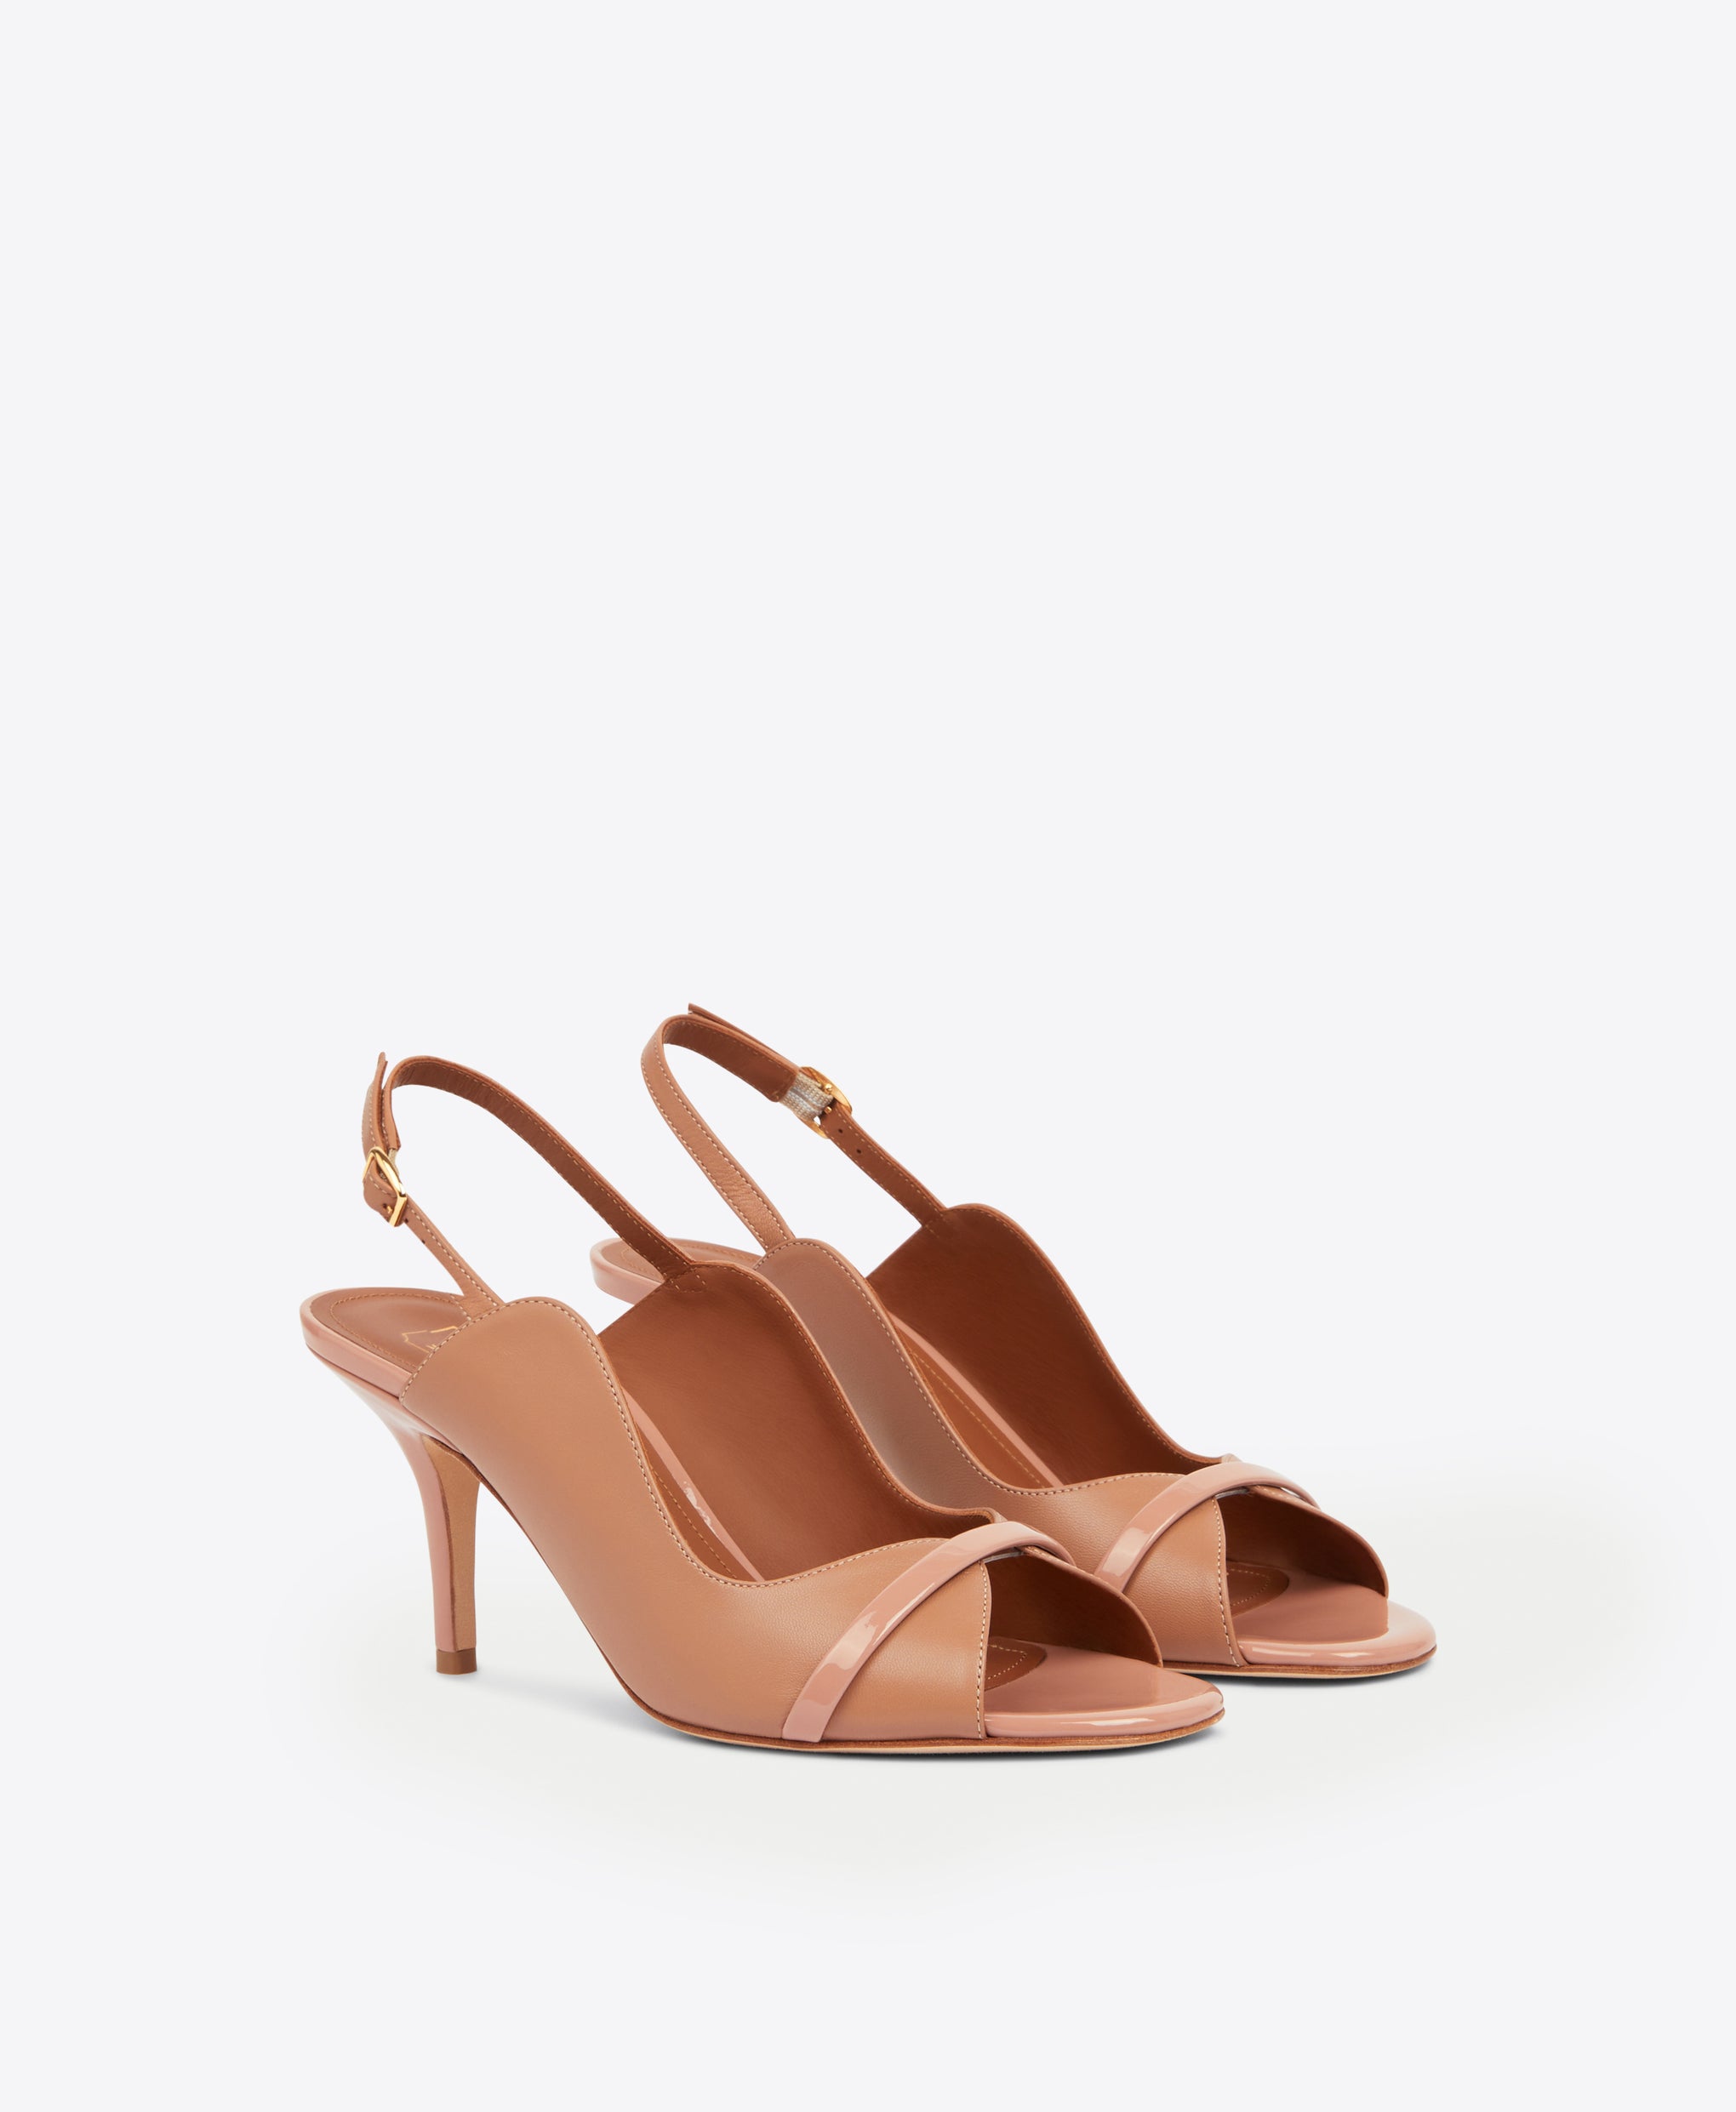 Women's Nude Leather Heeled Slingback Sandals Malone Souliers